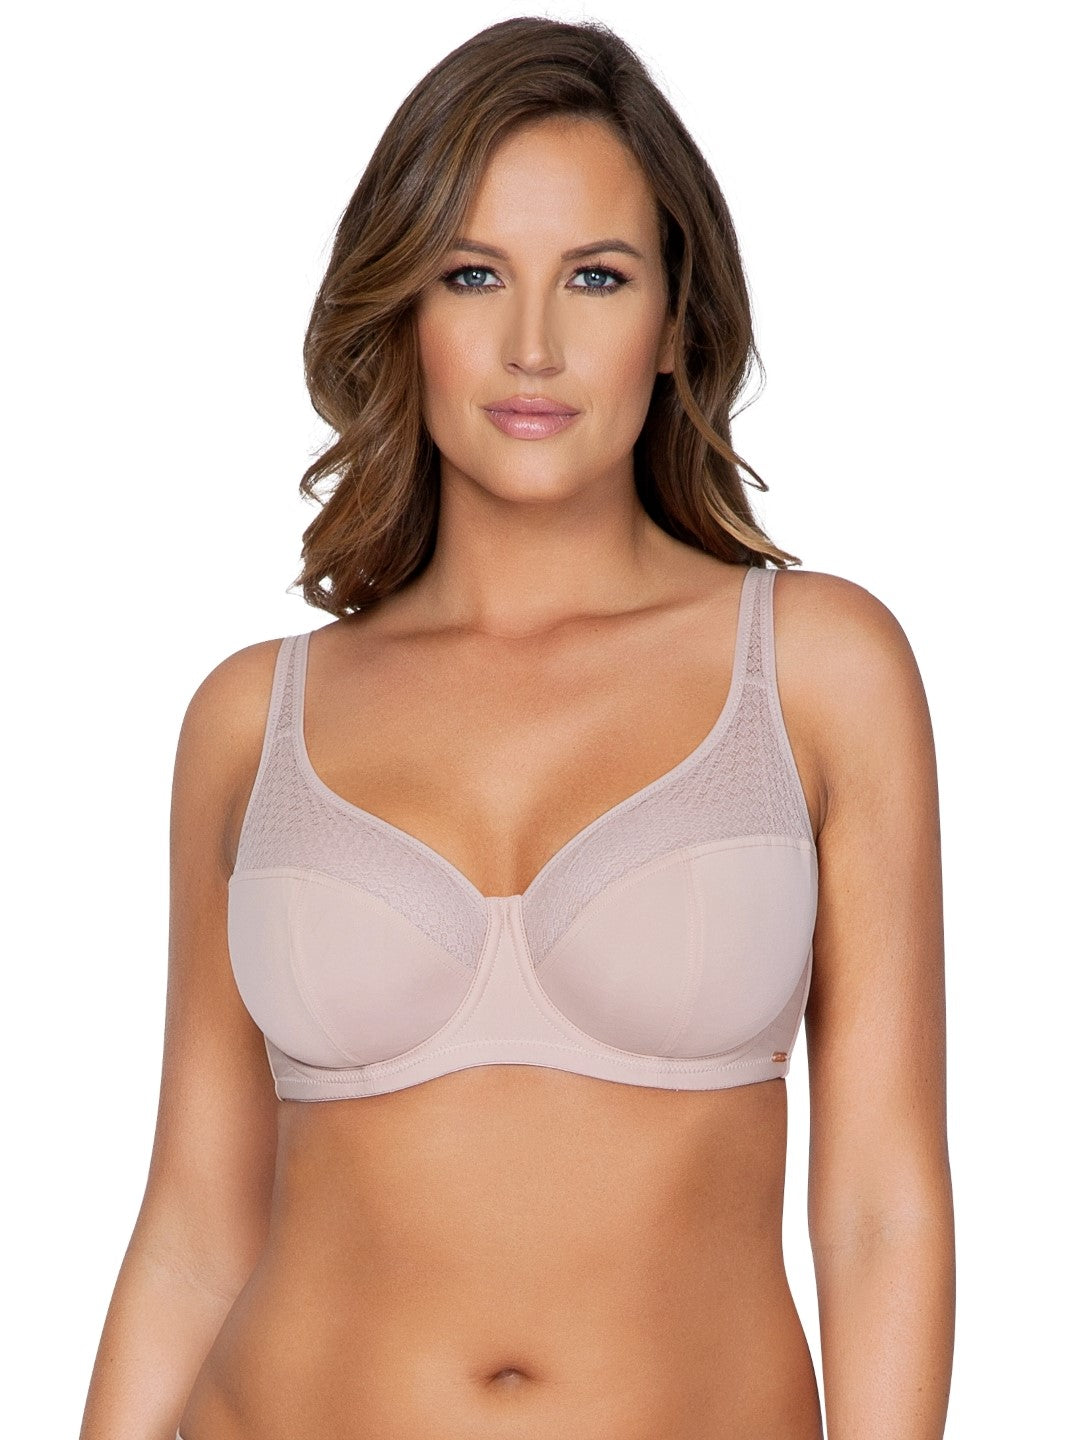 Buy Vintage French Bra Online In India -  India